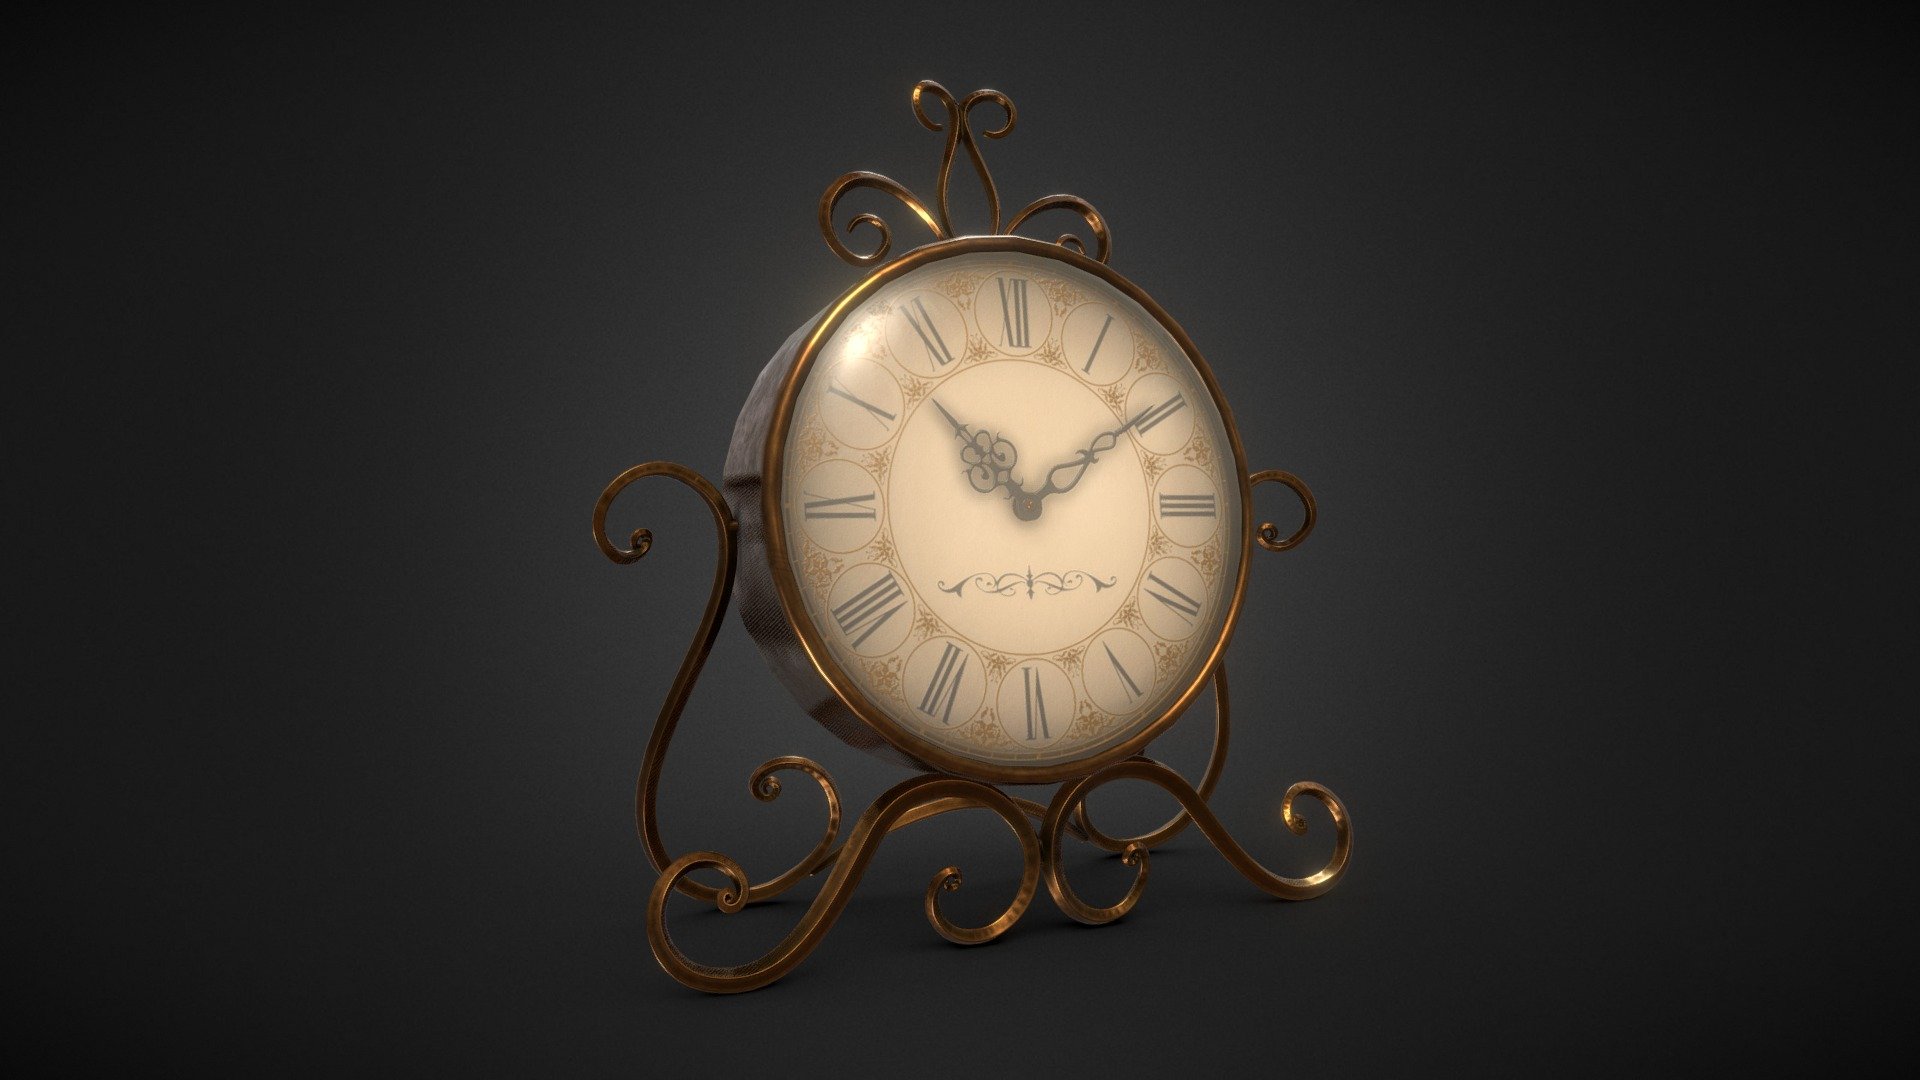 Vintage Clock

Low poly game ready model. Total polycount 7337 tris.

PBR Metallic - Roughness 2k (512 for glass) textures.

Model created on Blander. Textured with Substance Painter 3d model